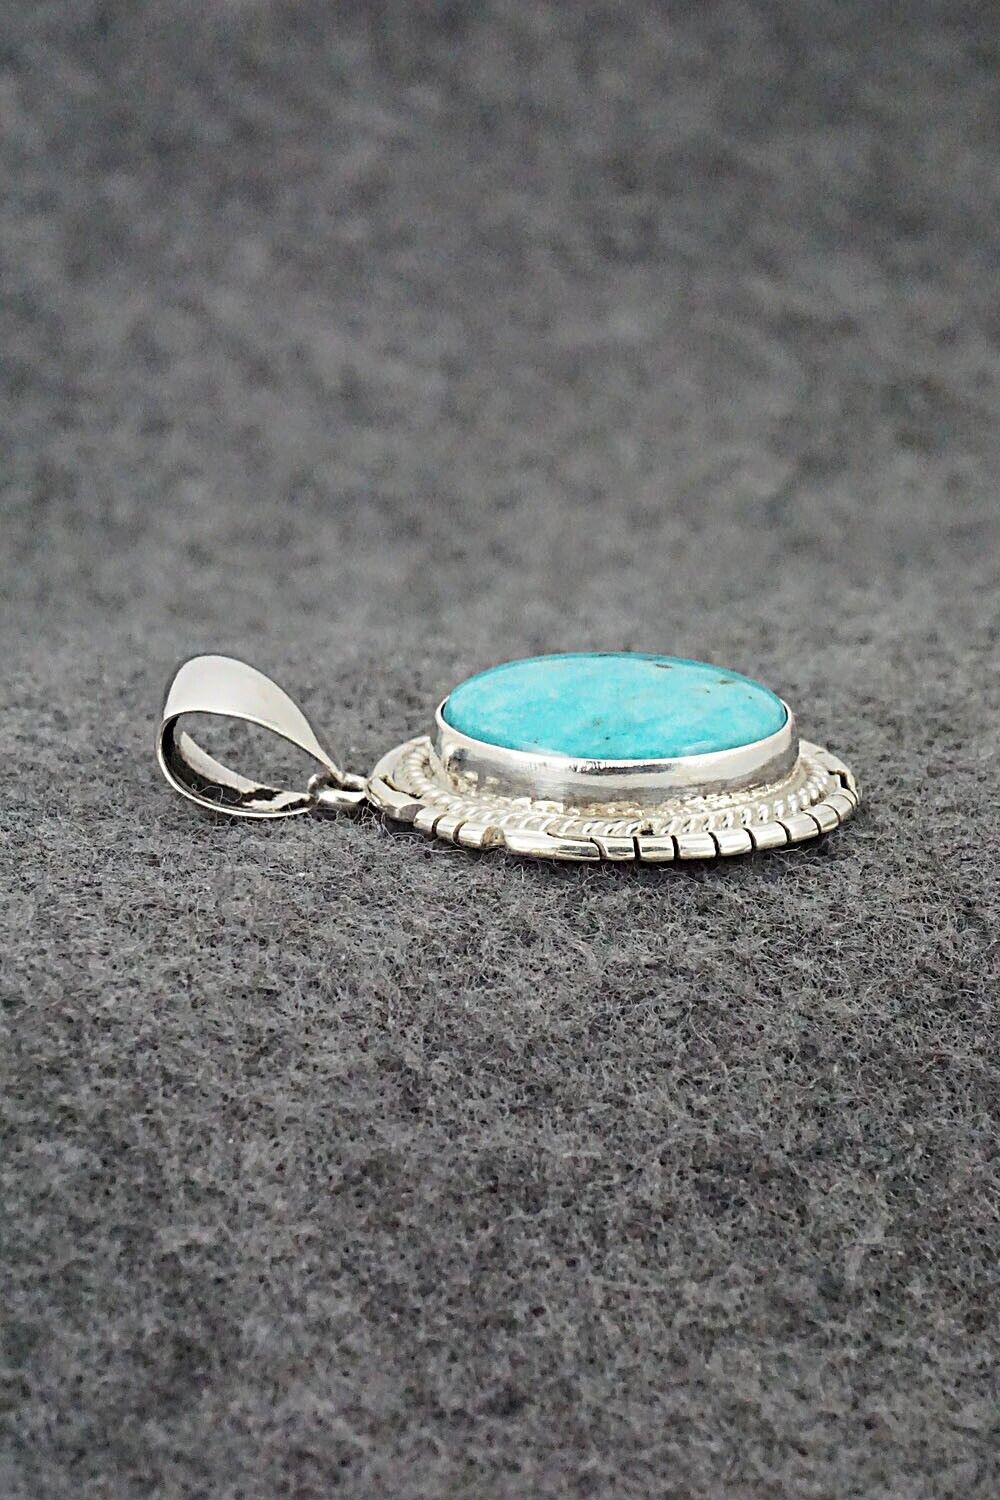 Turquoise & Sterling Silver Pendant - Peggy Skeets